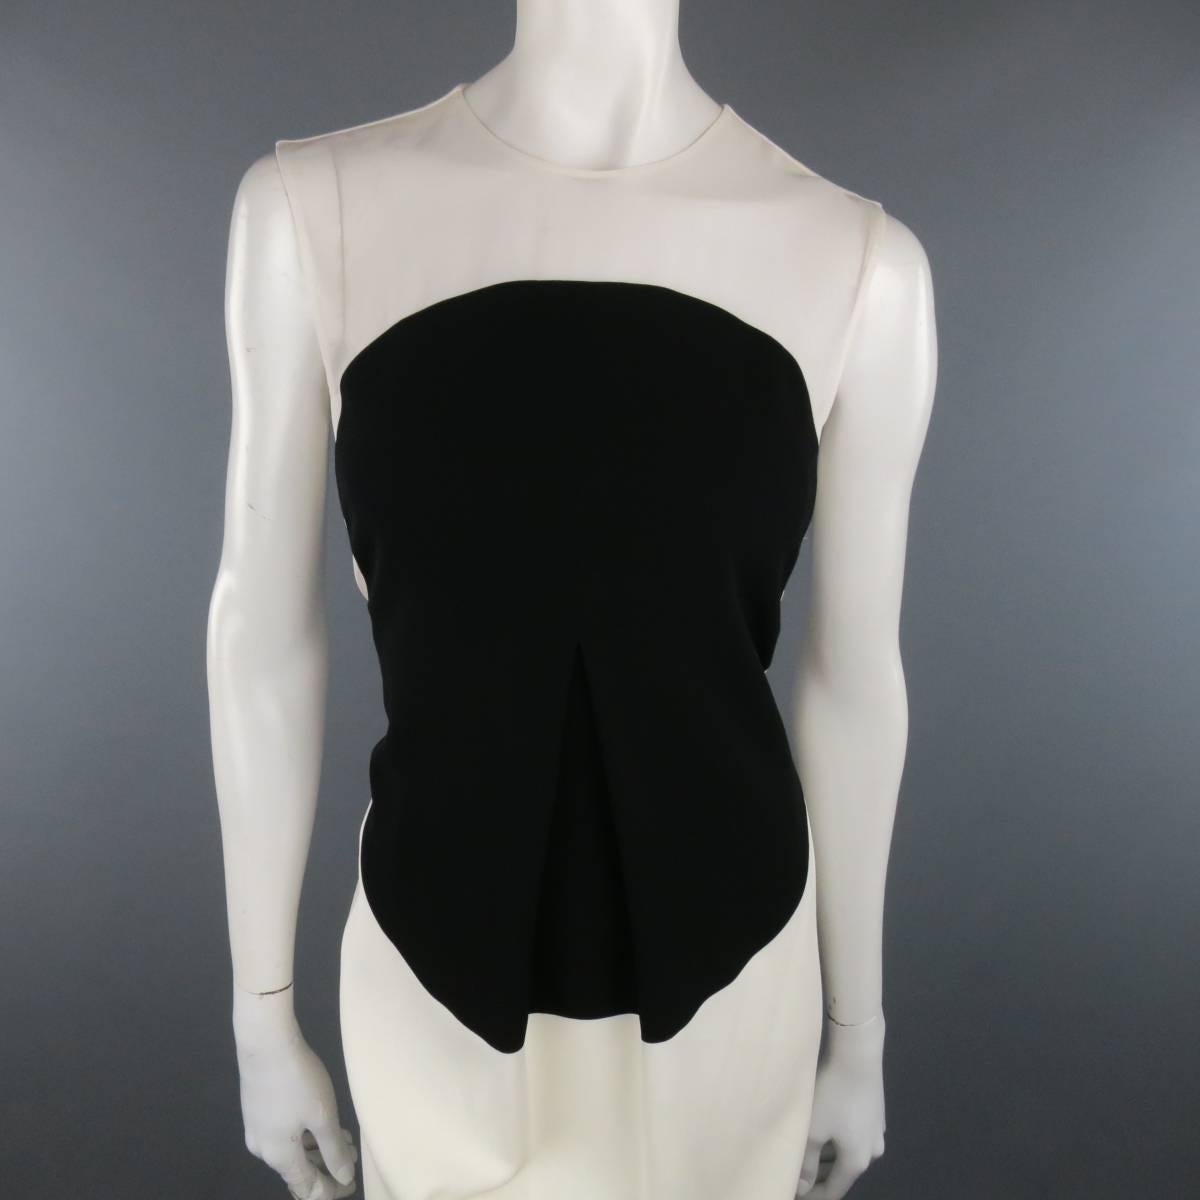 CALVIN KLEIN COLLECTION sleeveless shift dress comes in a cream fabric and features a sheer front panel, black circle panel, box pleated front. Made in Italy.
 
New with Tags.
Marked: 6/42
 
Measurements:
 
Shoulder: 15 in.
Bust: 35 in.
Waist: 32